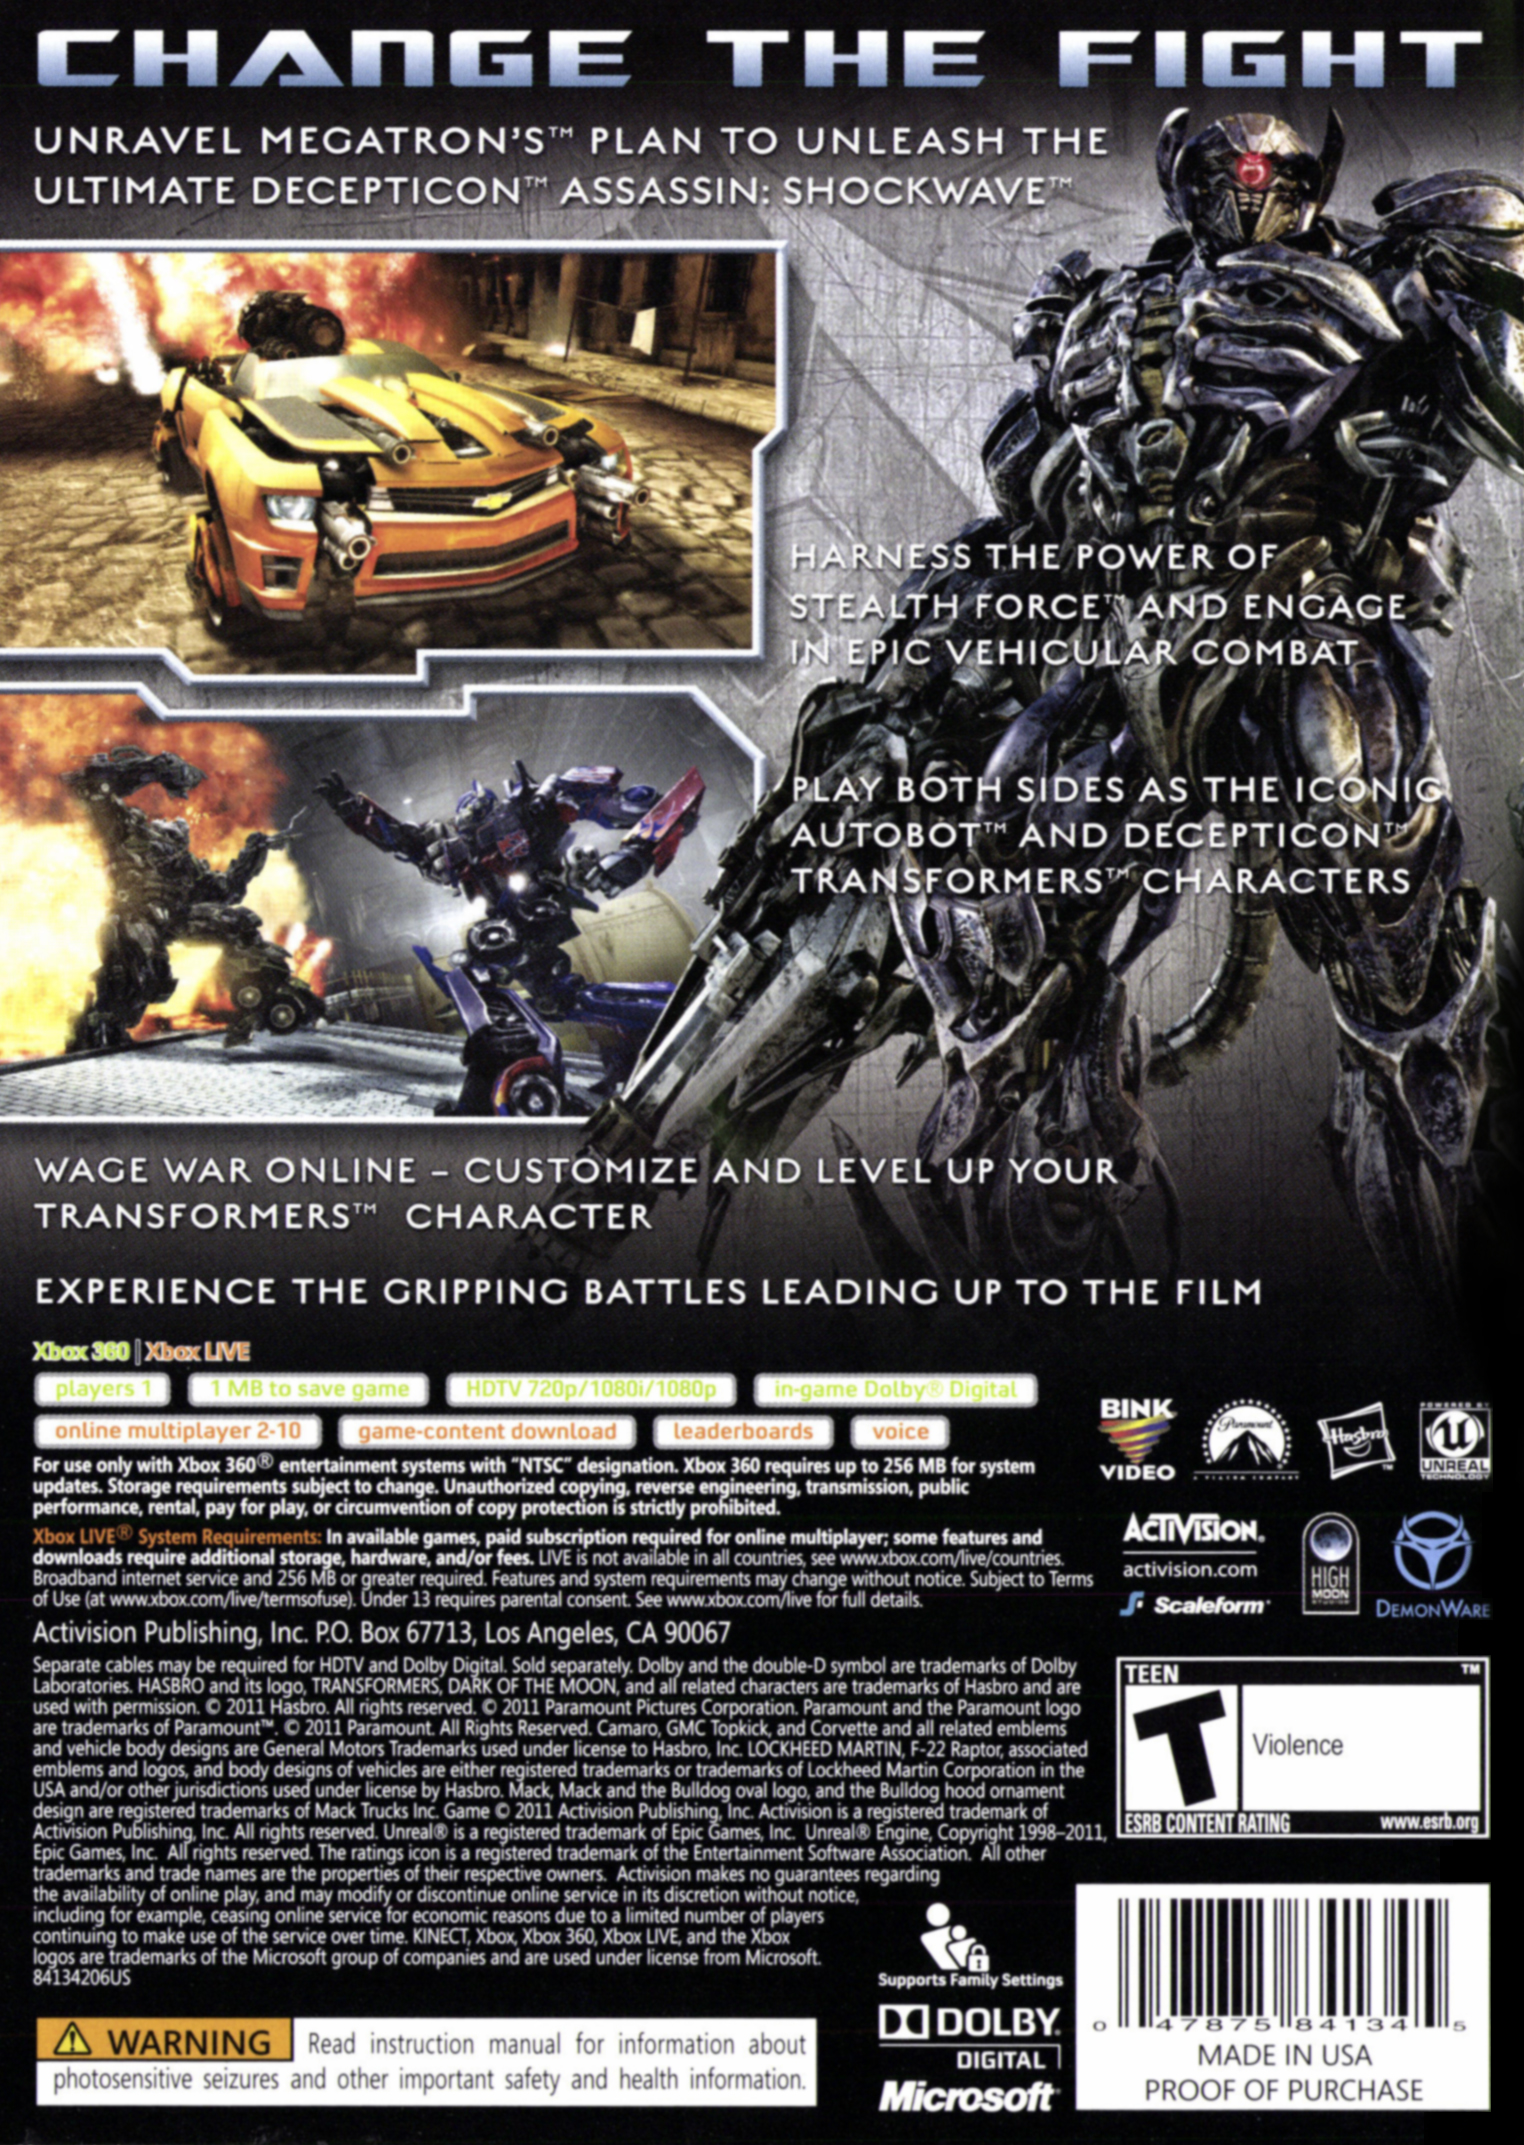 Transformers: Dark of the Moon, Sony, Xbox 360, [Physical], 84134 - image 2 of 9